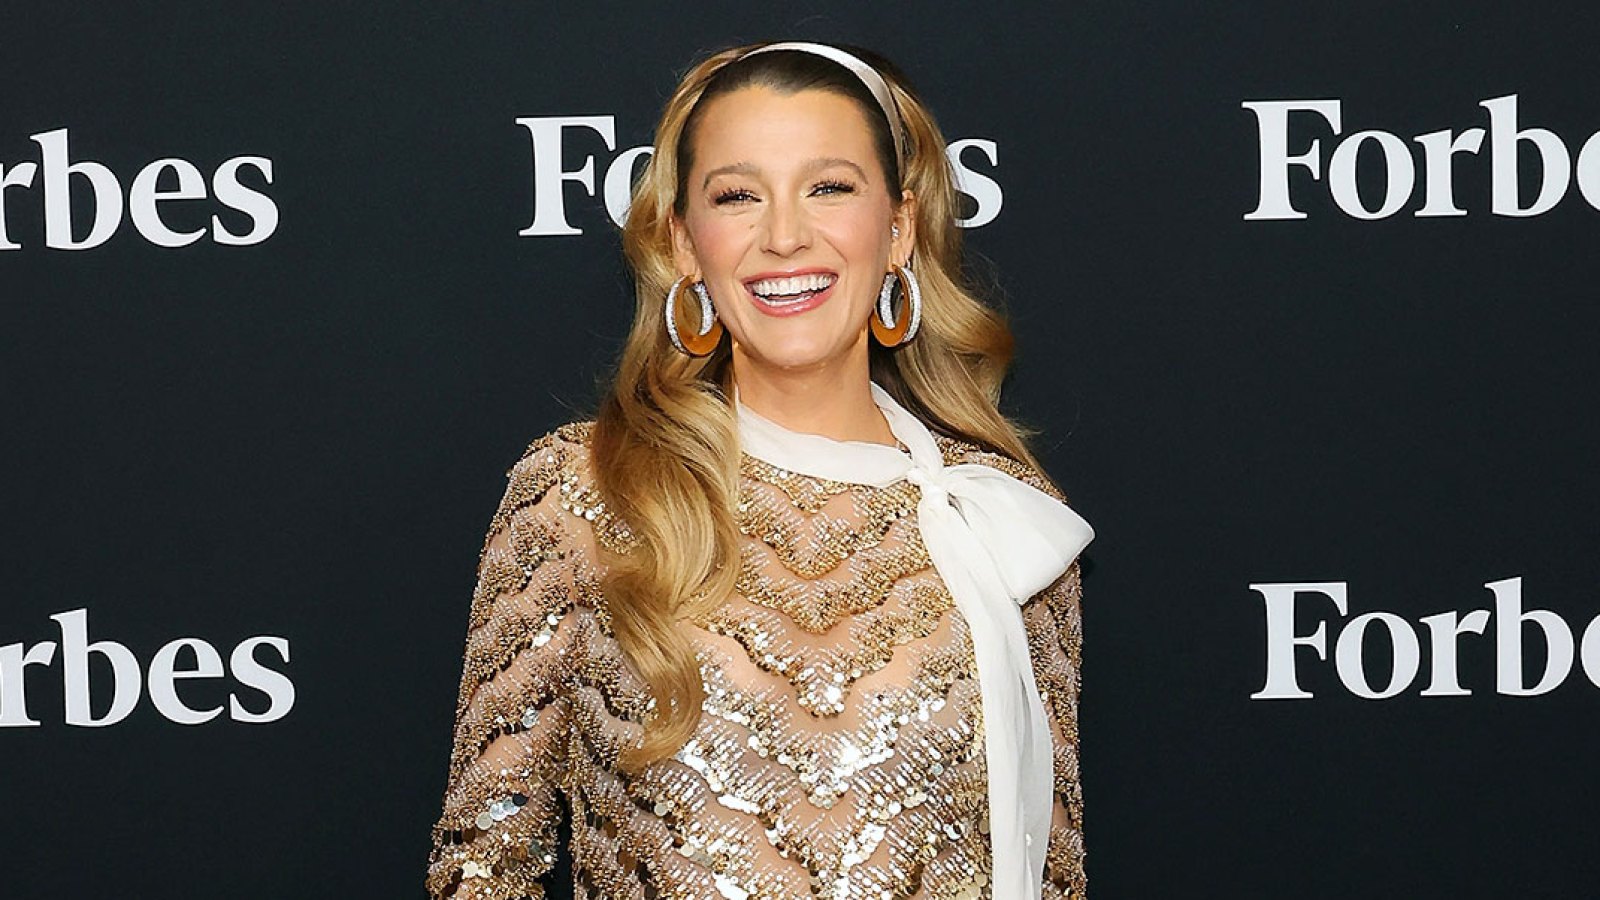 Blake Lively Wears Chanel and Louboutins to Bake in Paris